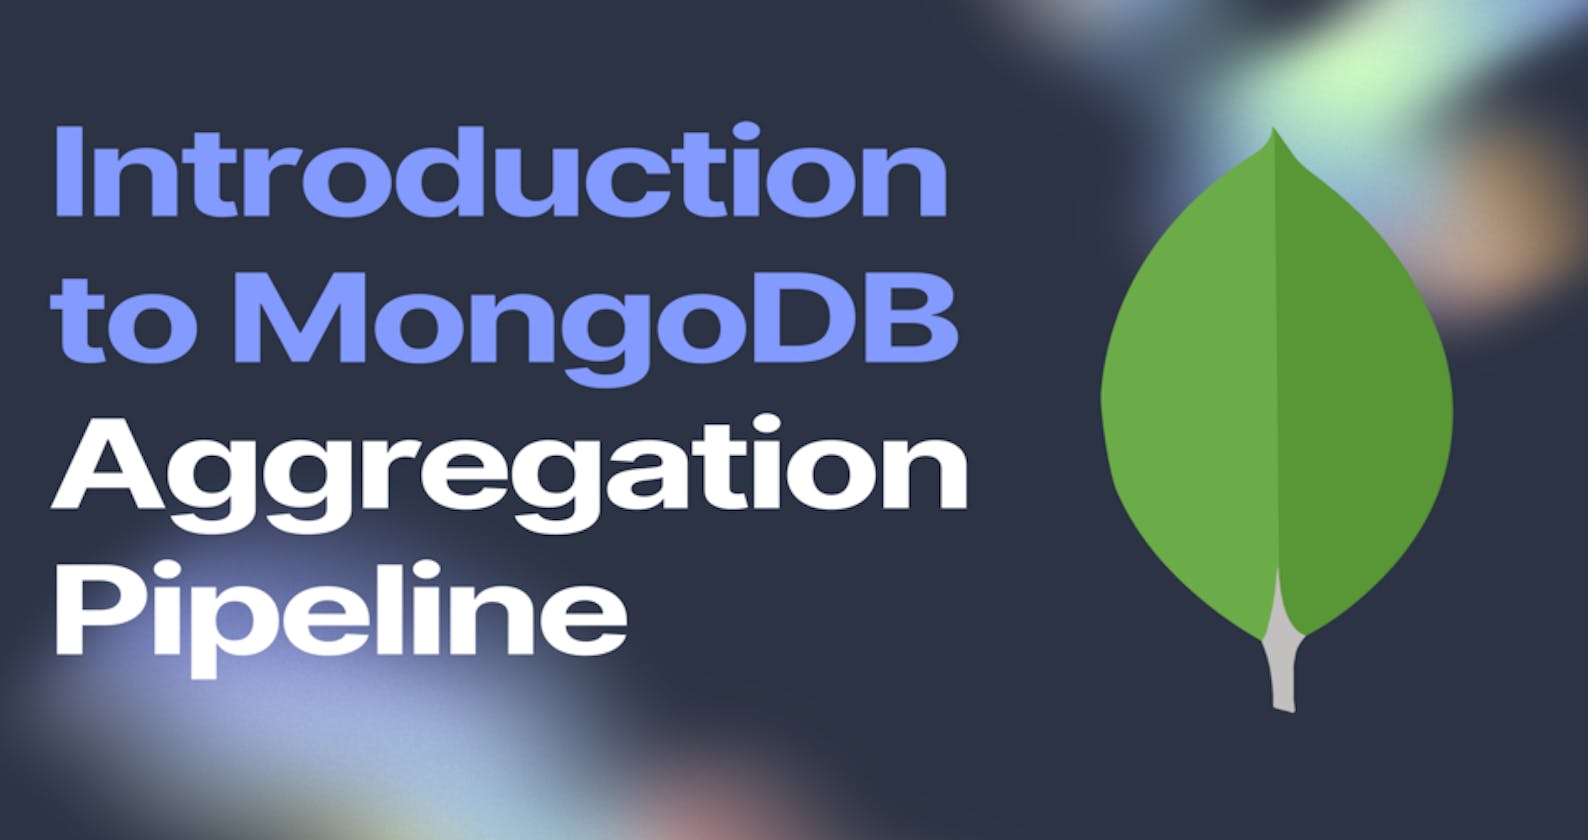 Introduction to MongoDB Aggregation Pipeline